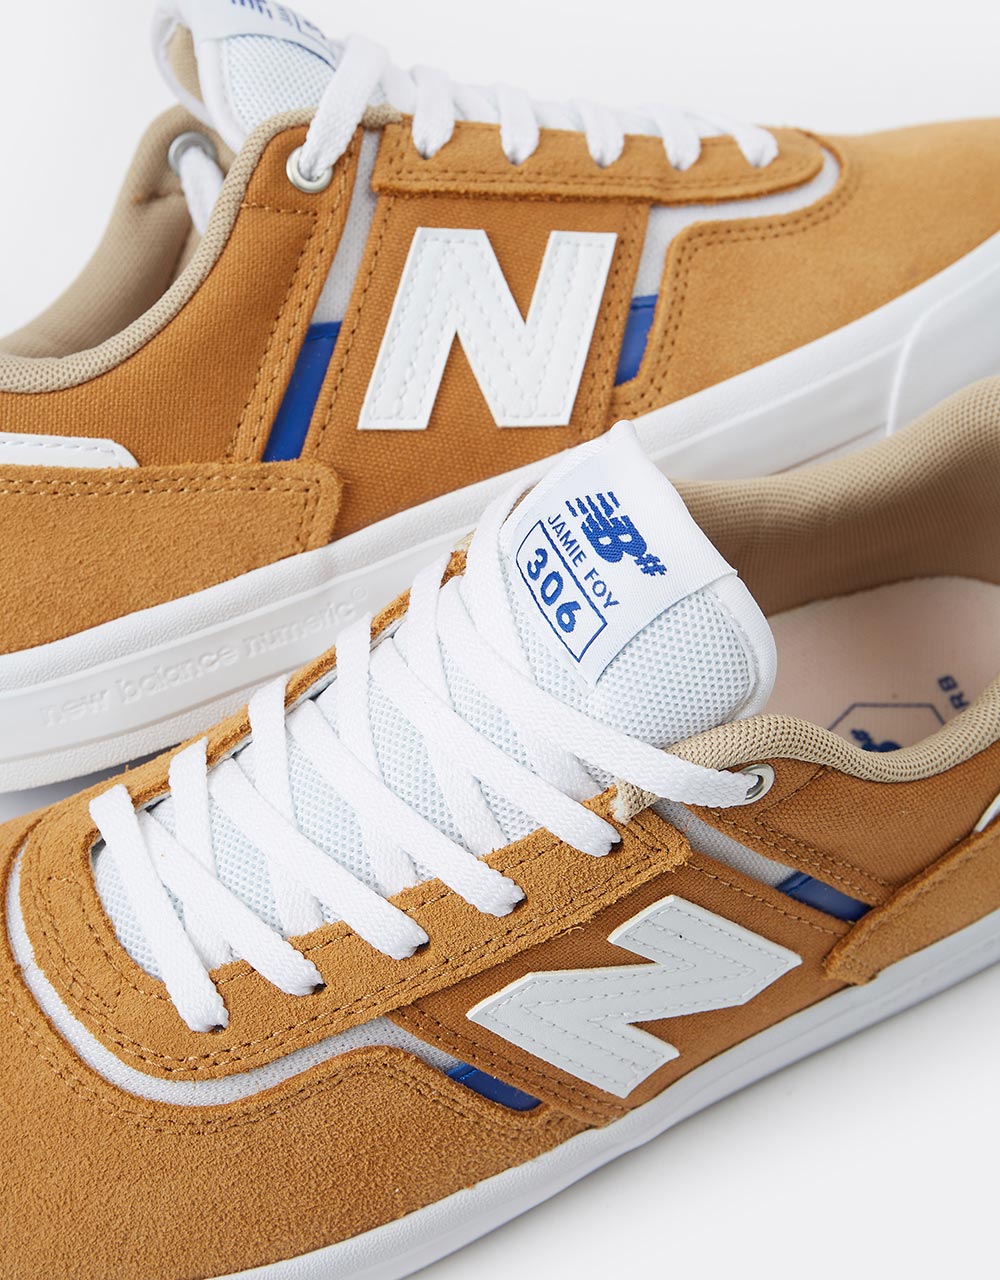 New Balance Numeric 306 Skate Shoes - Curry/White